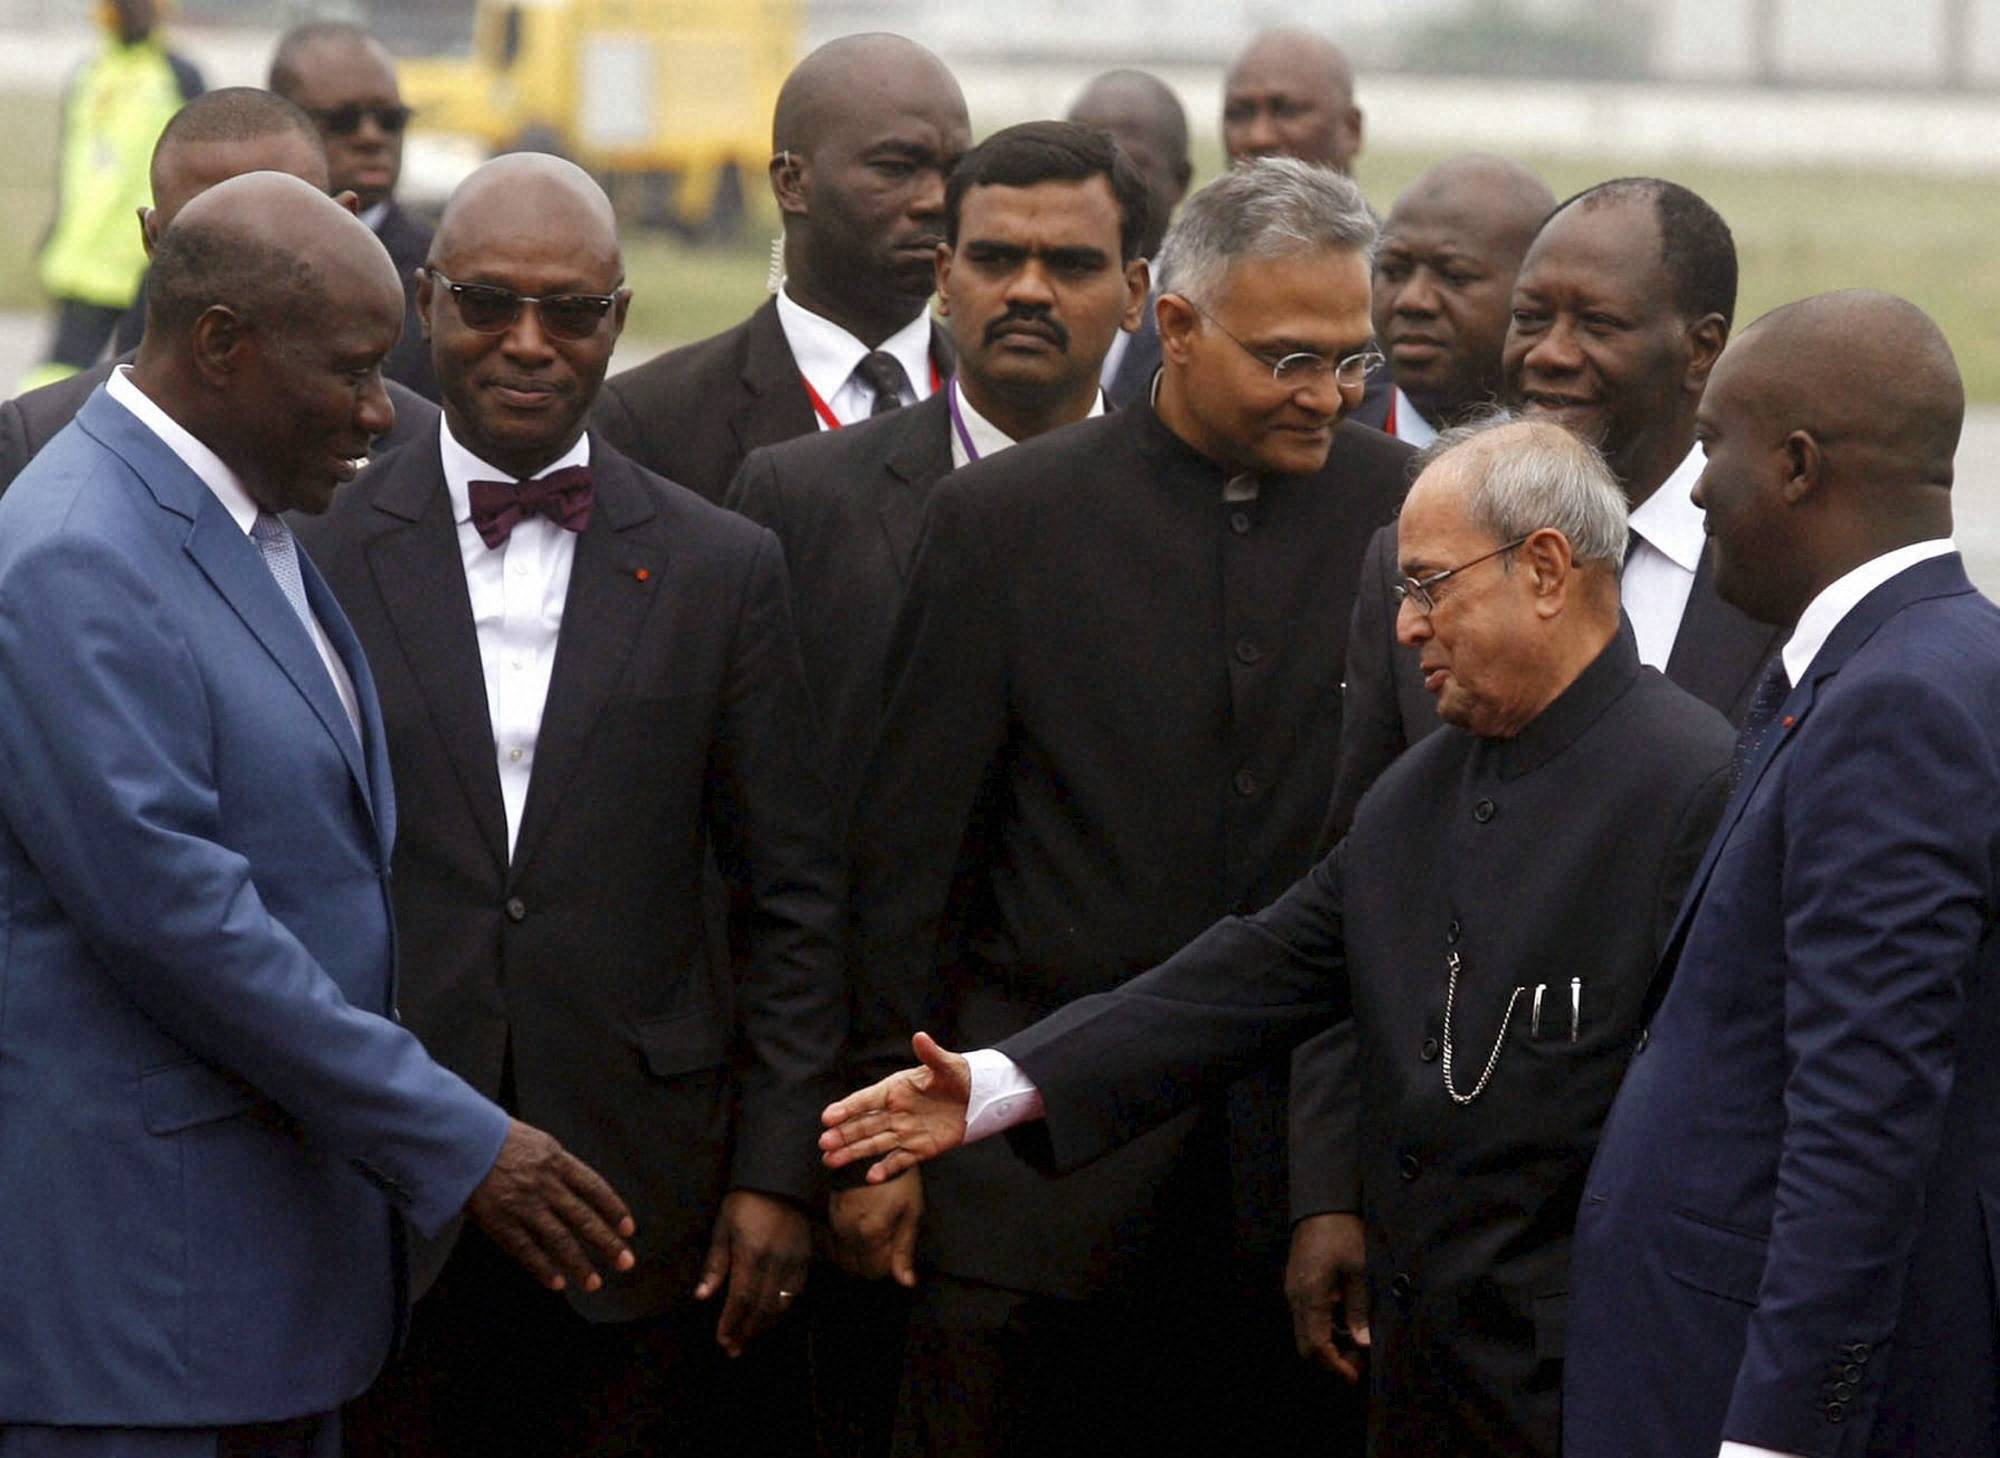 President arrives in Cote D'Ivoirie, to receive highest award